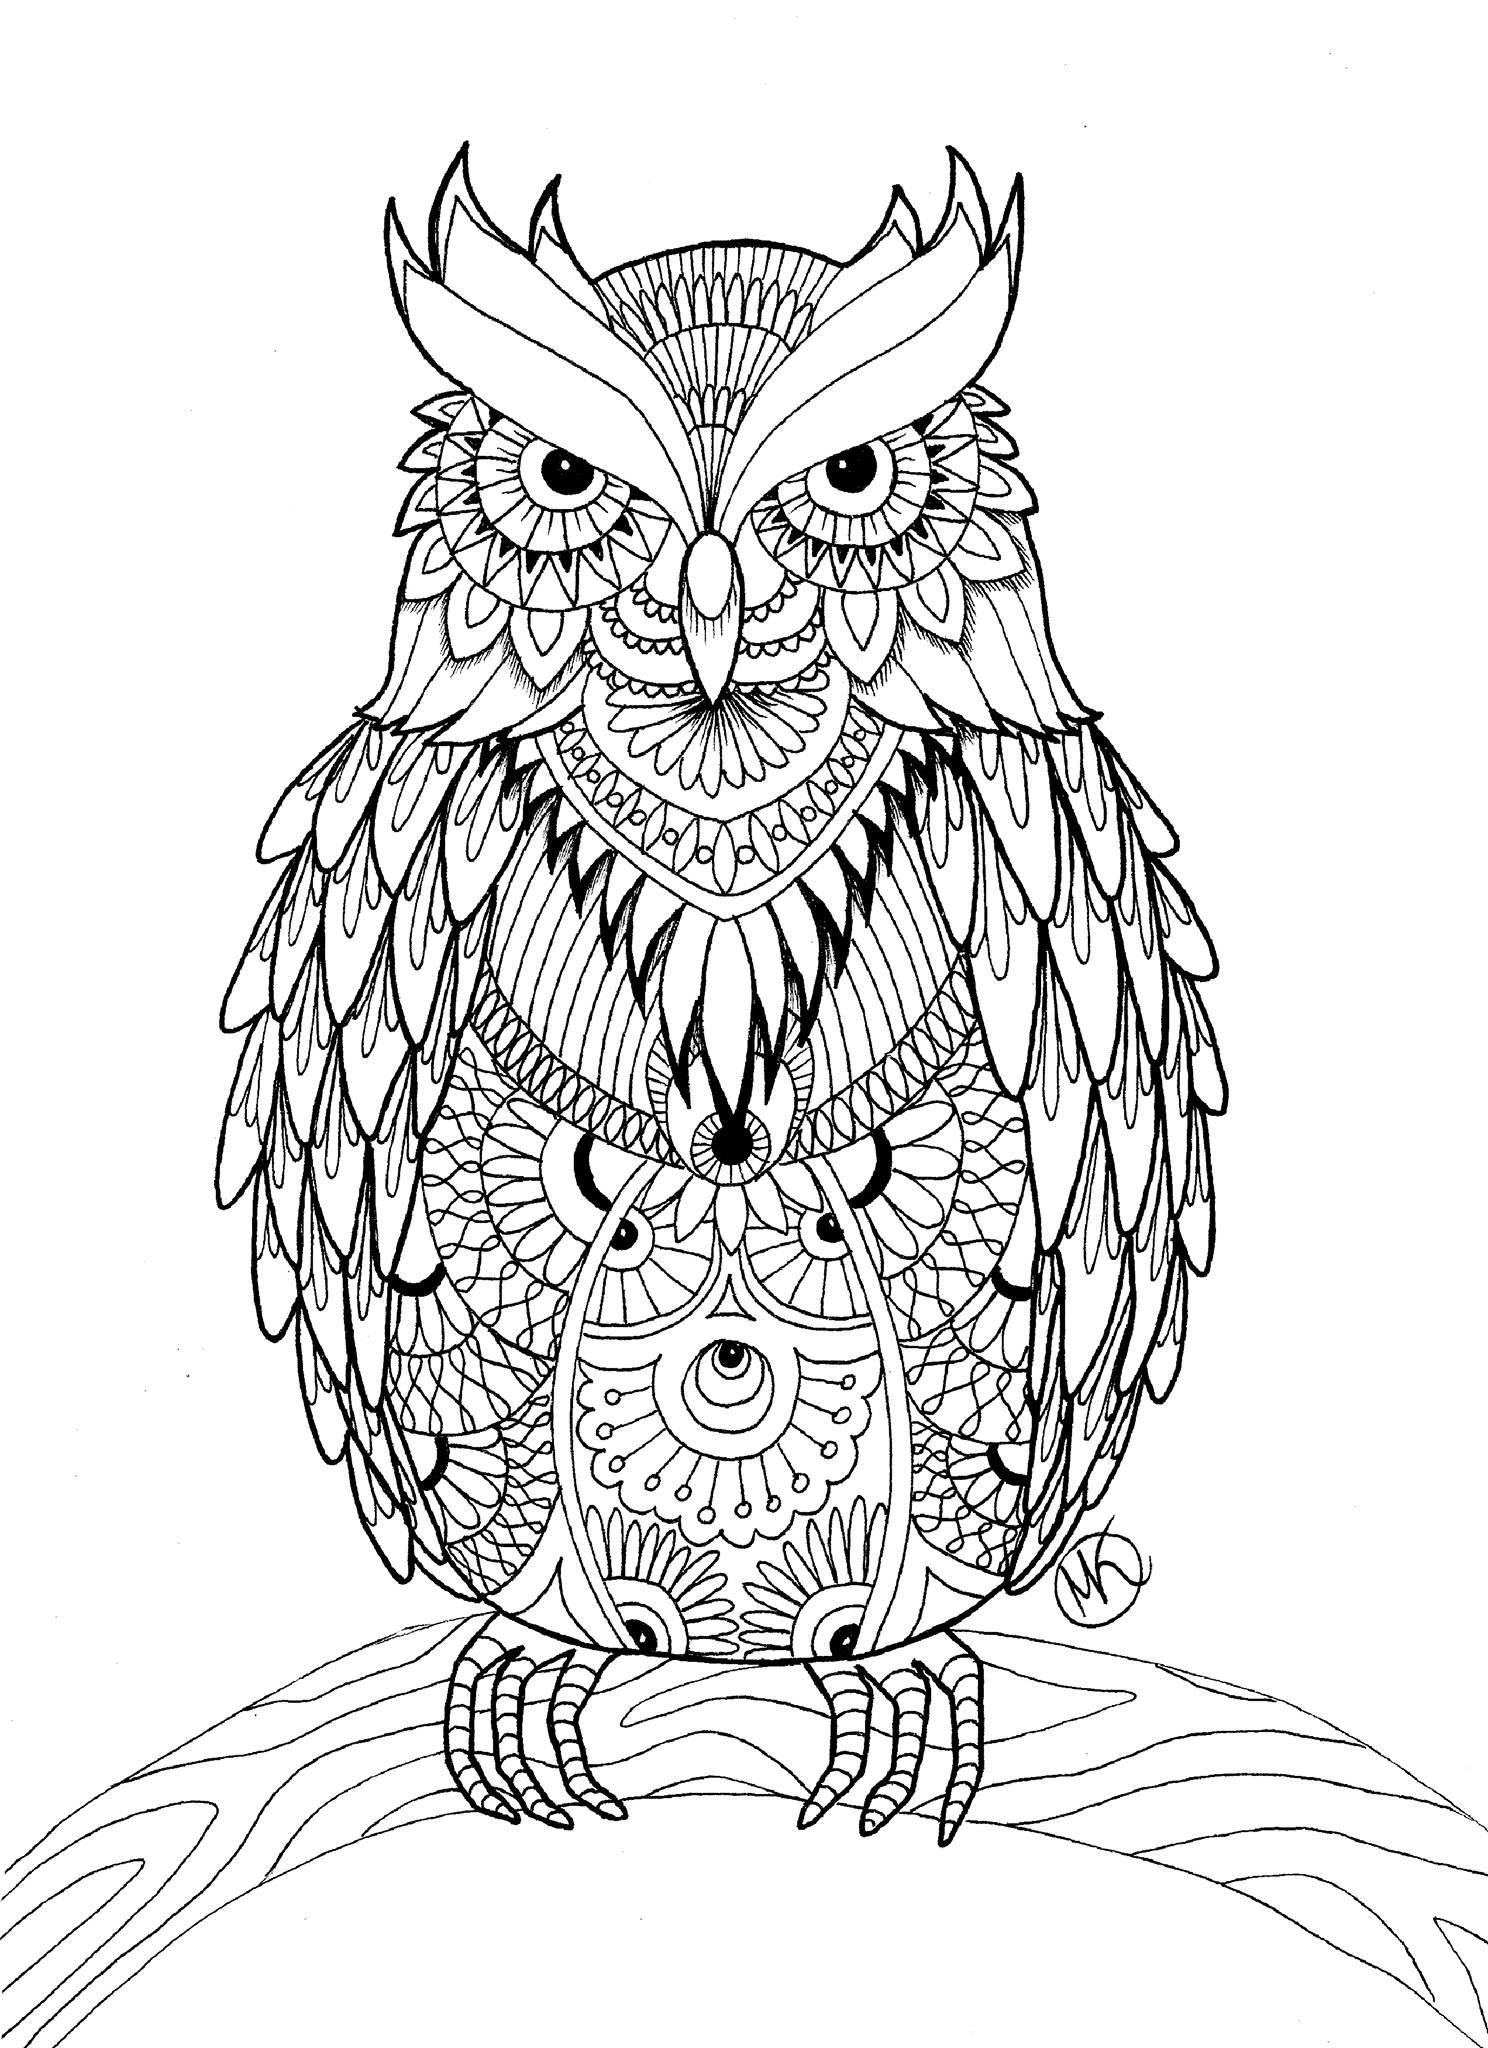 owl-coloring-pages-for-adults-free-detailed-owl-coloring-pages